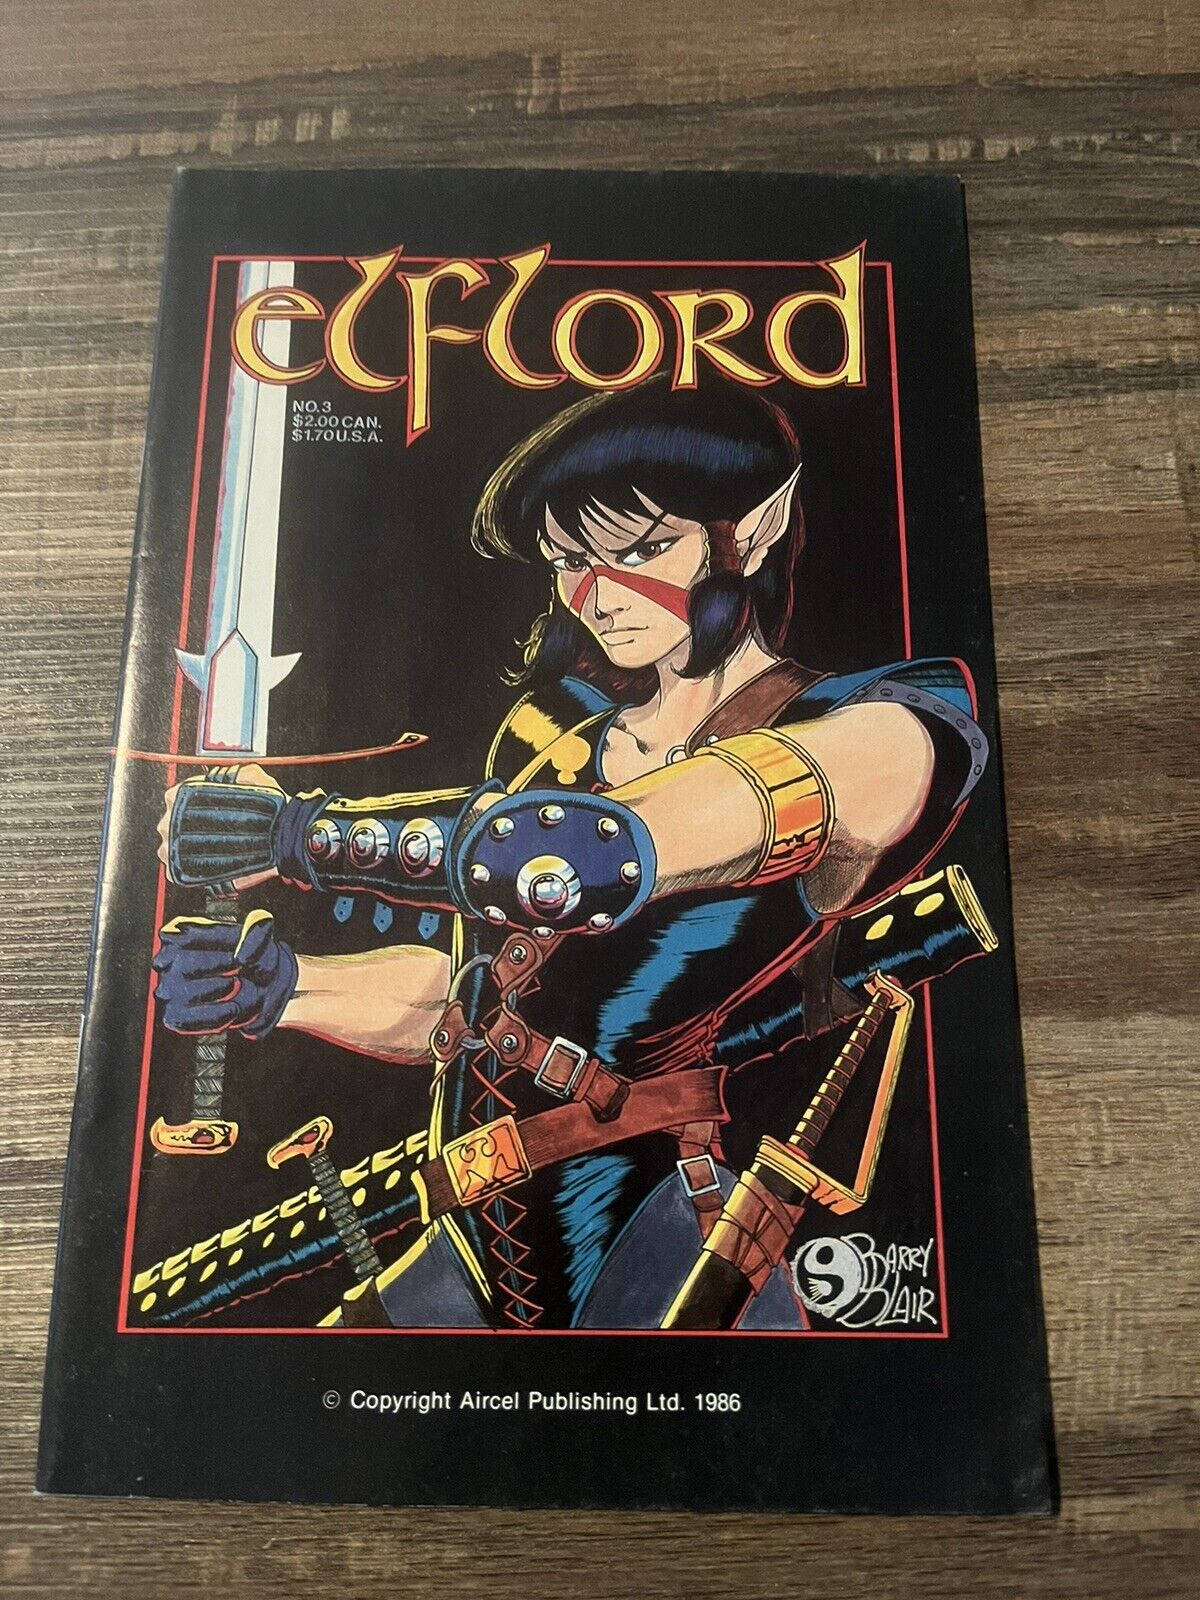 ELFLORD #3 (1986) Barry Blair Story, Cover, & Art High Grade Comic Book Unread